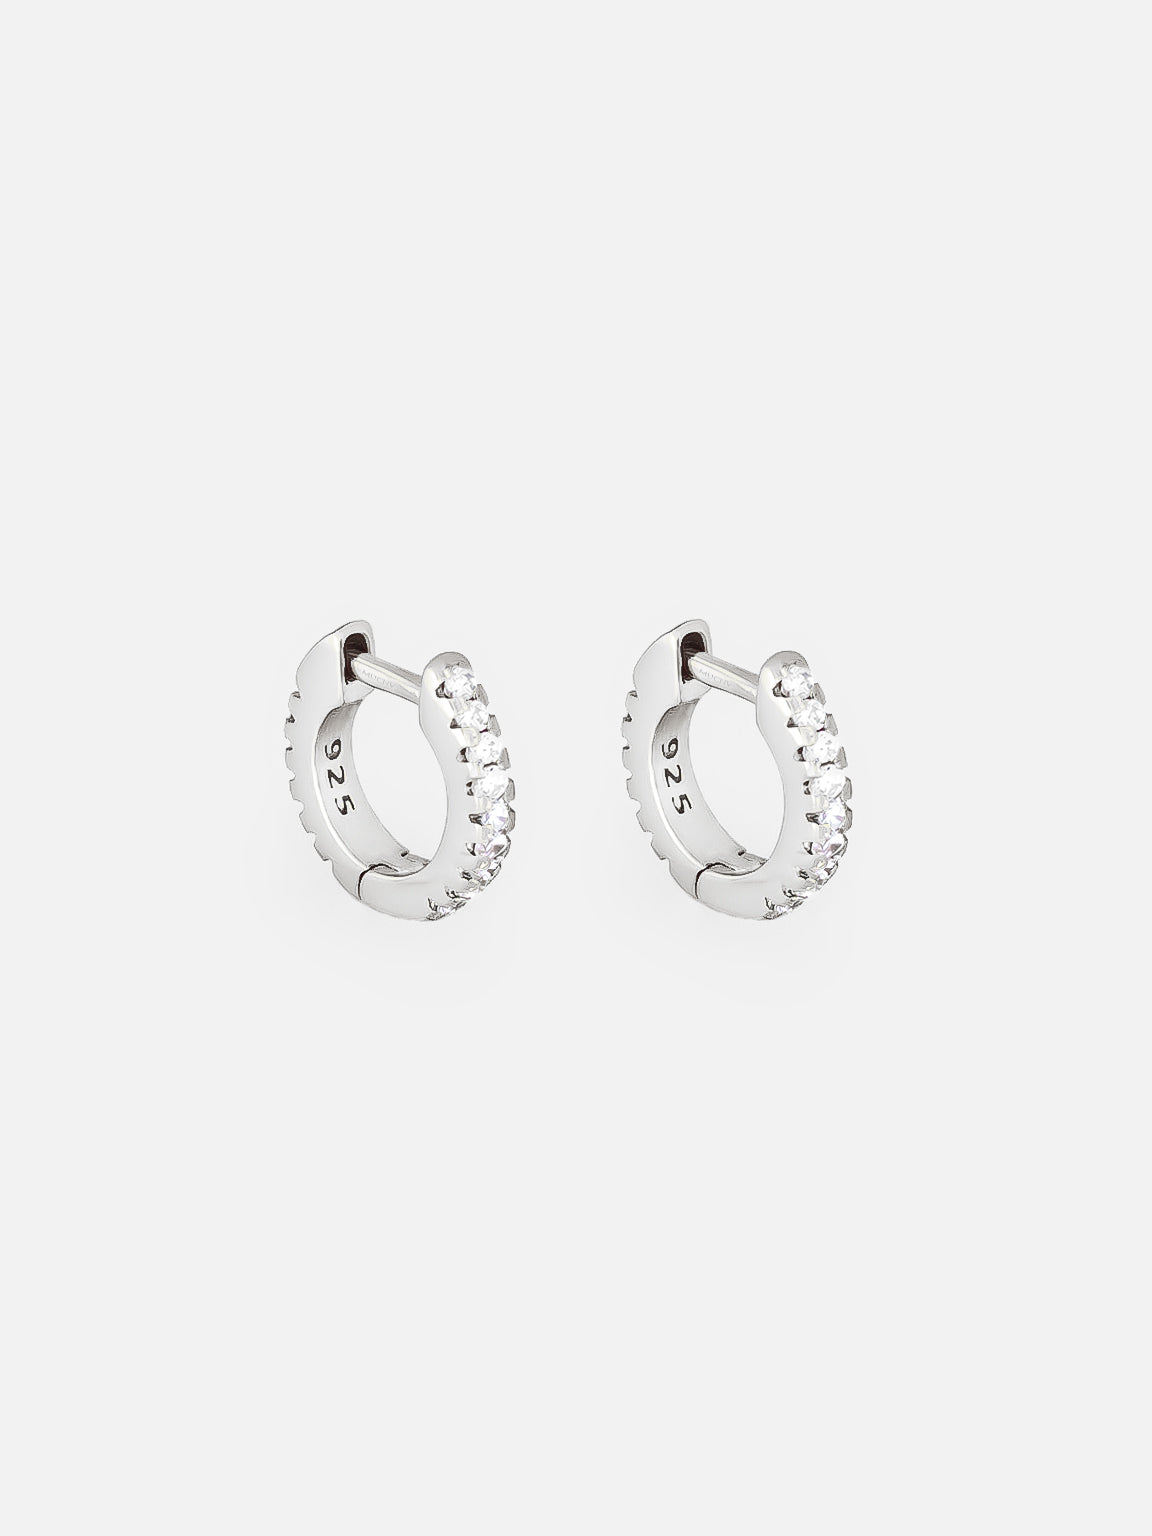 Silver Tiny Hoop Earrings For Helix or Tragus With Stones